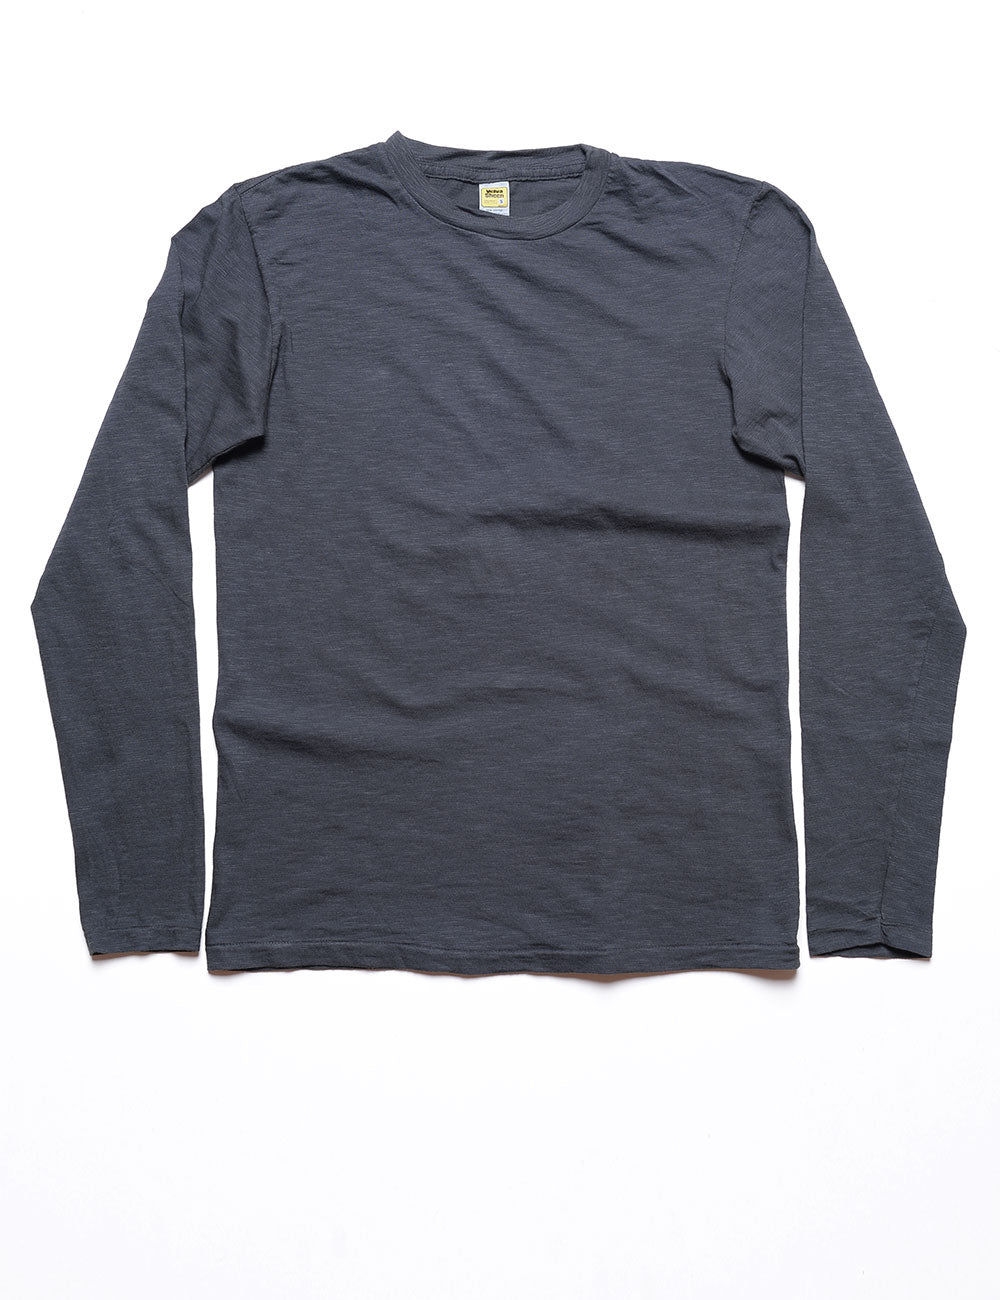 Long Sleeve Crewneck T-Shirt in Washed Black